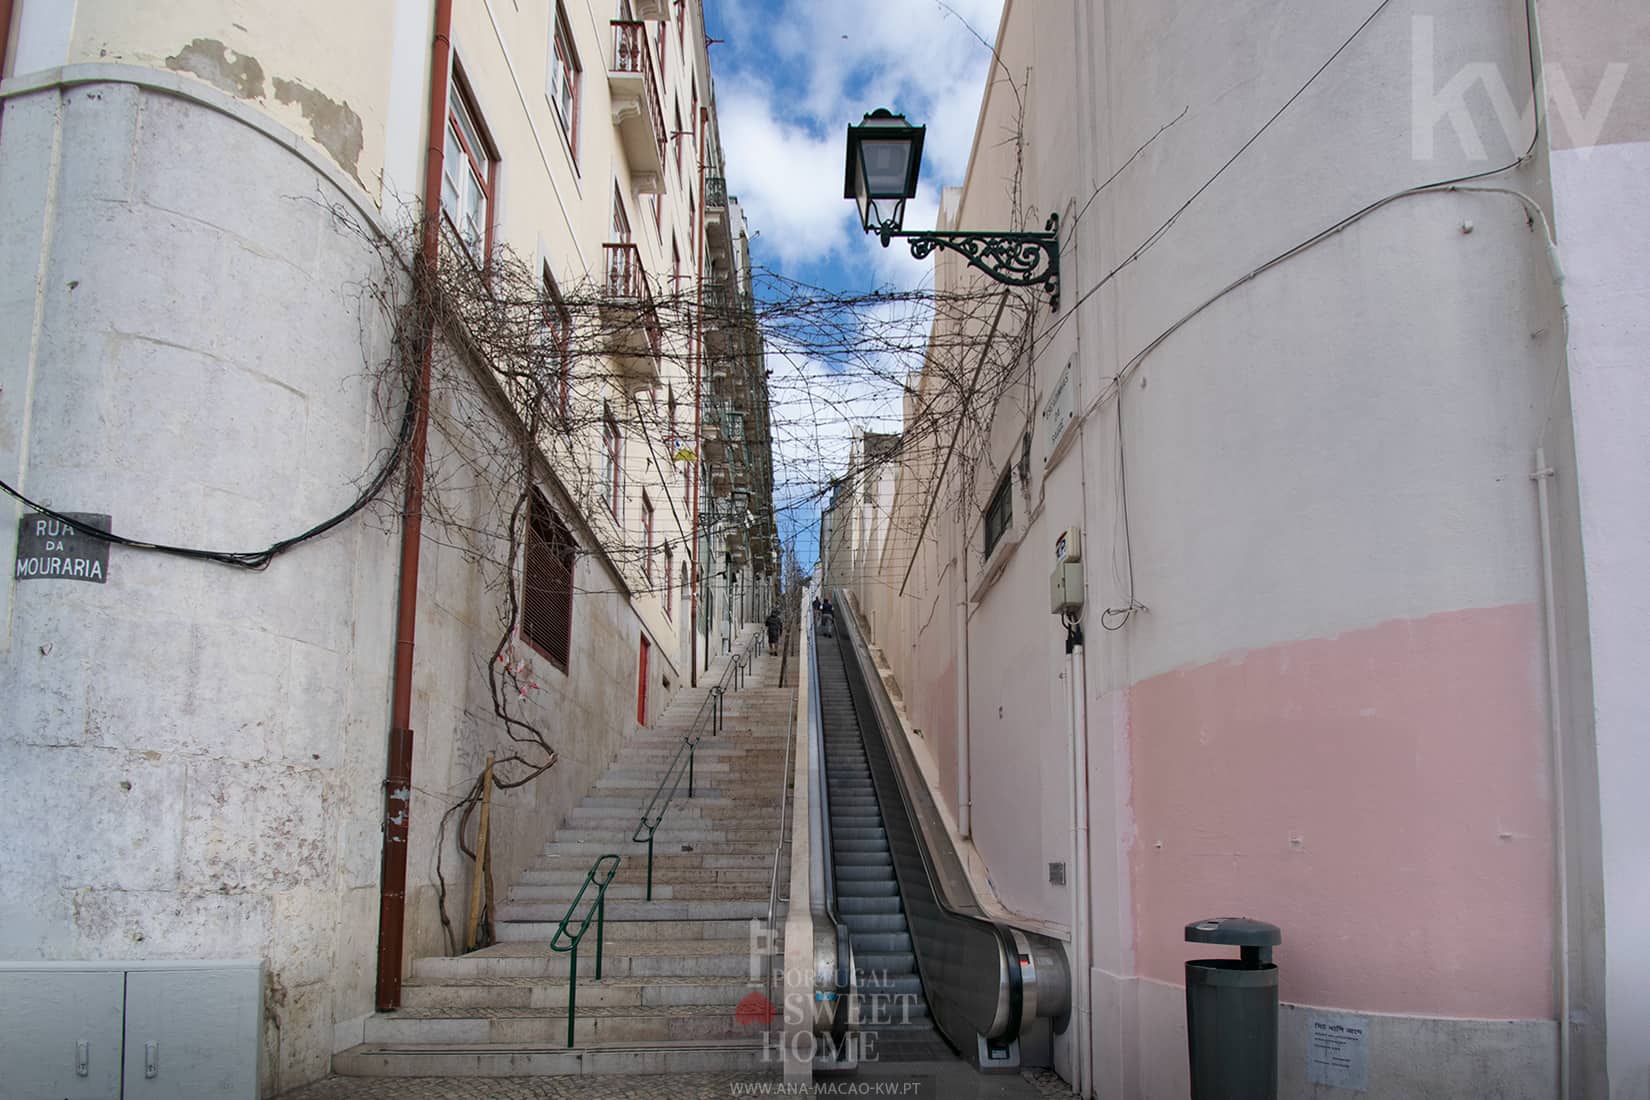 Funicular that connects Praça Martim Moniz to the outskirts of the Apartment